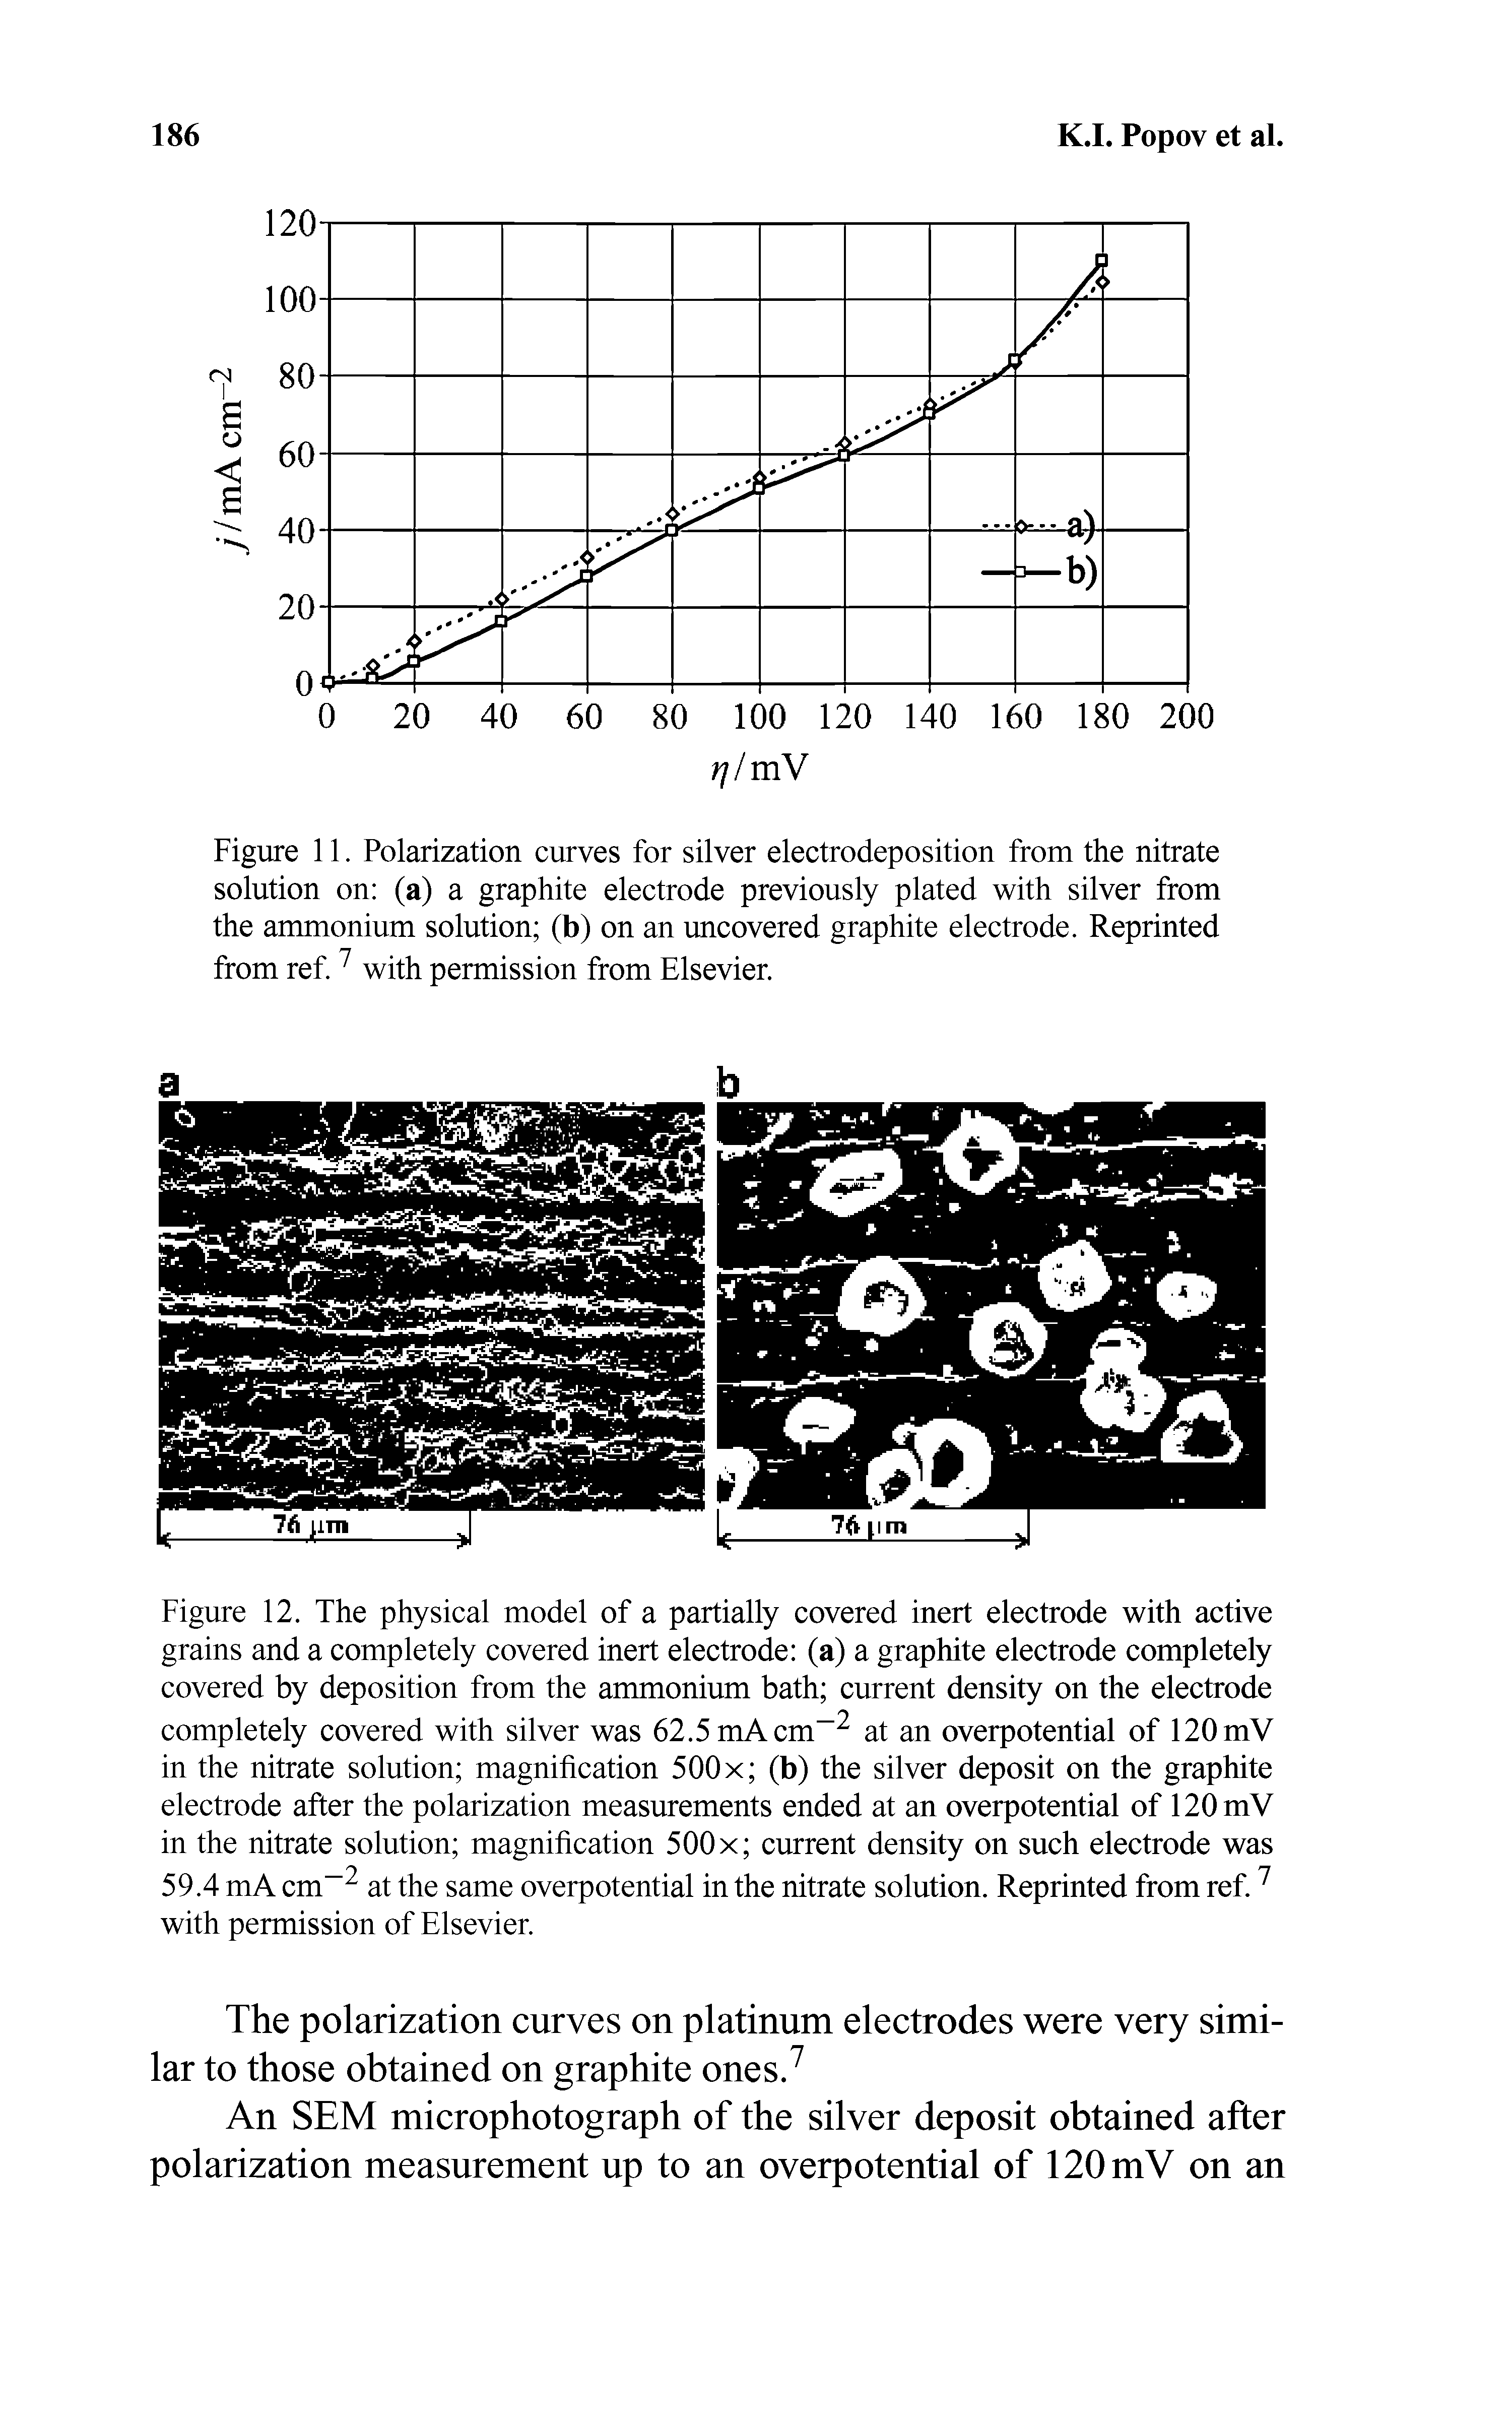 Figure 11. Polarization curves for silver electrodeposition from the nitrate solution on (a) a graphite electrode previously plated with silver from the ammonium solution (b) on an uncovered graphite electrode. Reprinted from ref.7 with permission from Elsevier.